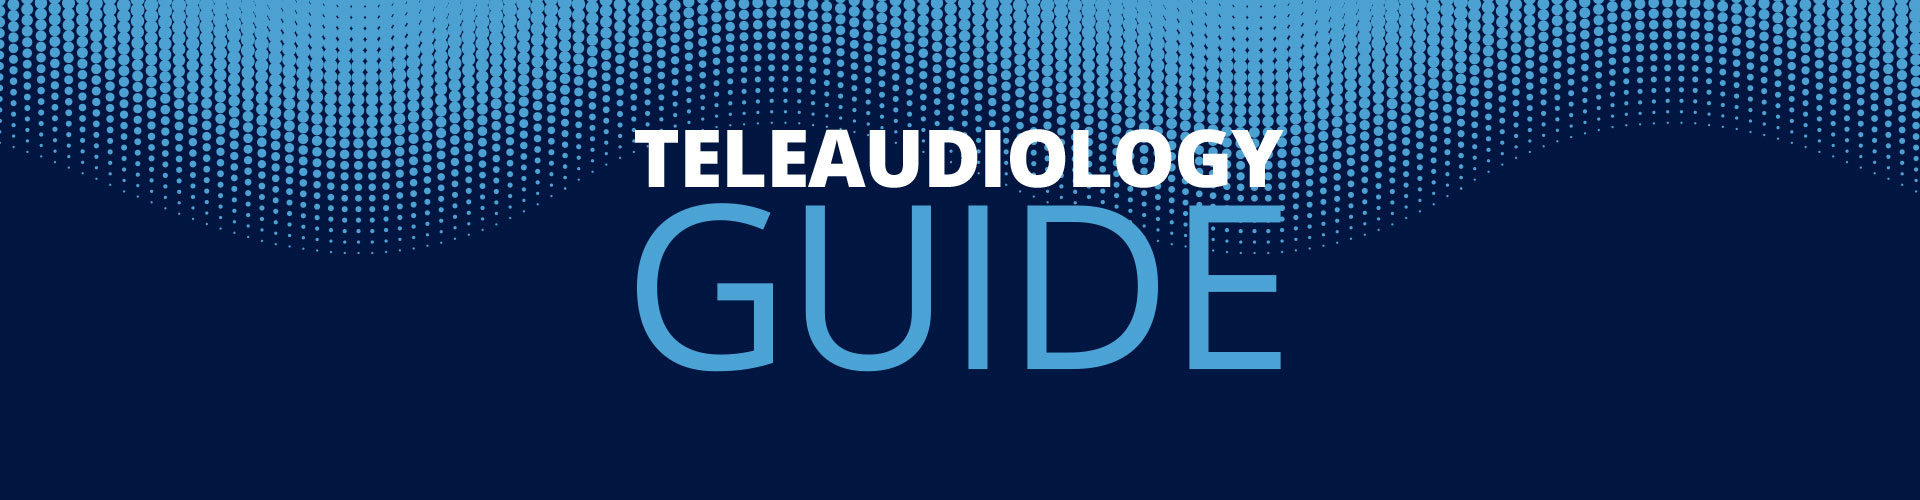 Teleaudiology buyers guide